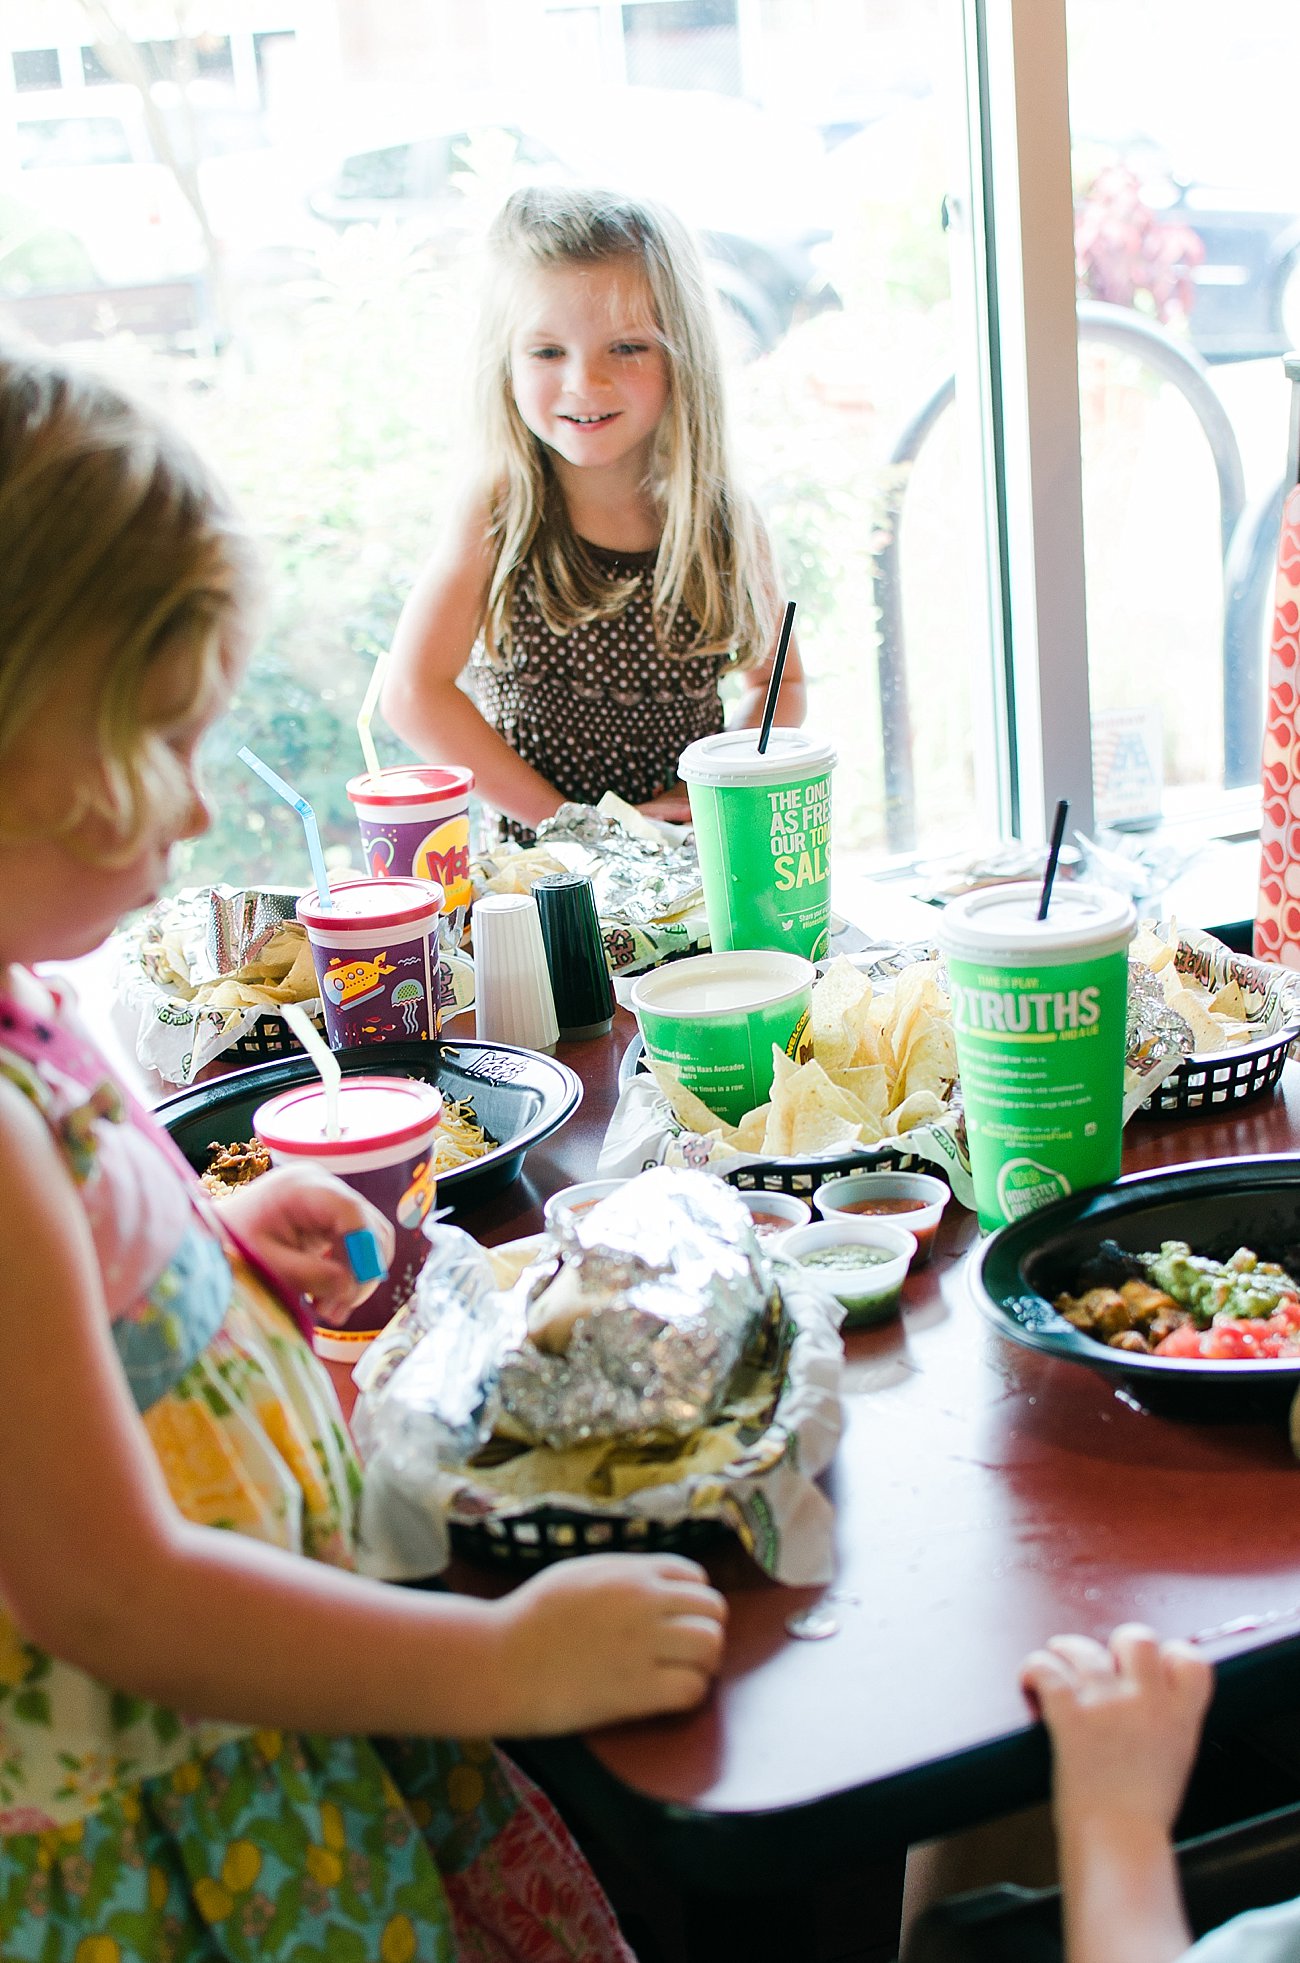 Fresh Food For Everyone at Moe's Southwest Grill #MadeAtMoes #ad (4)